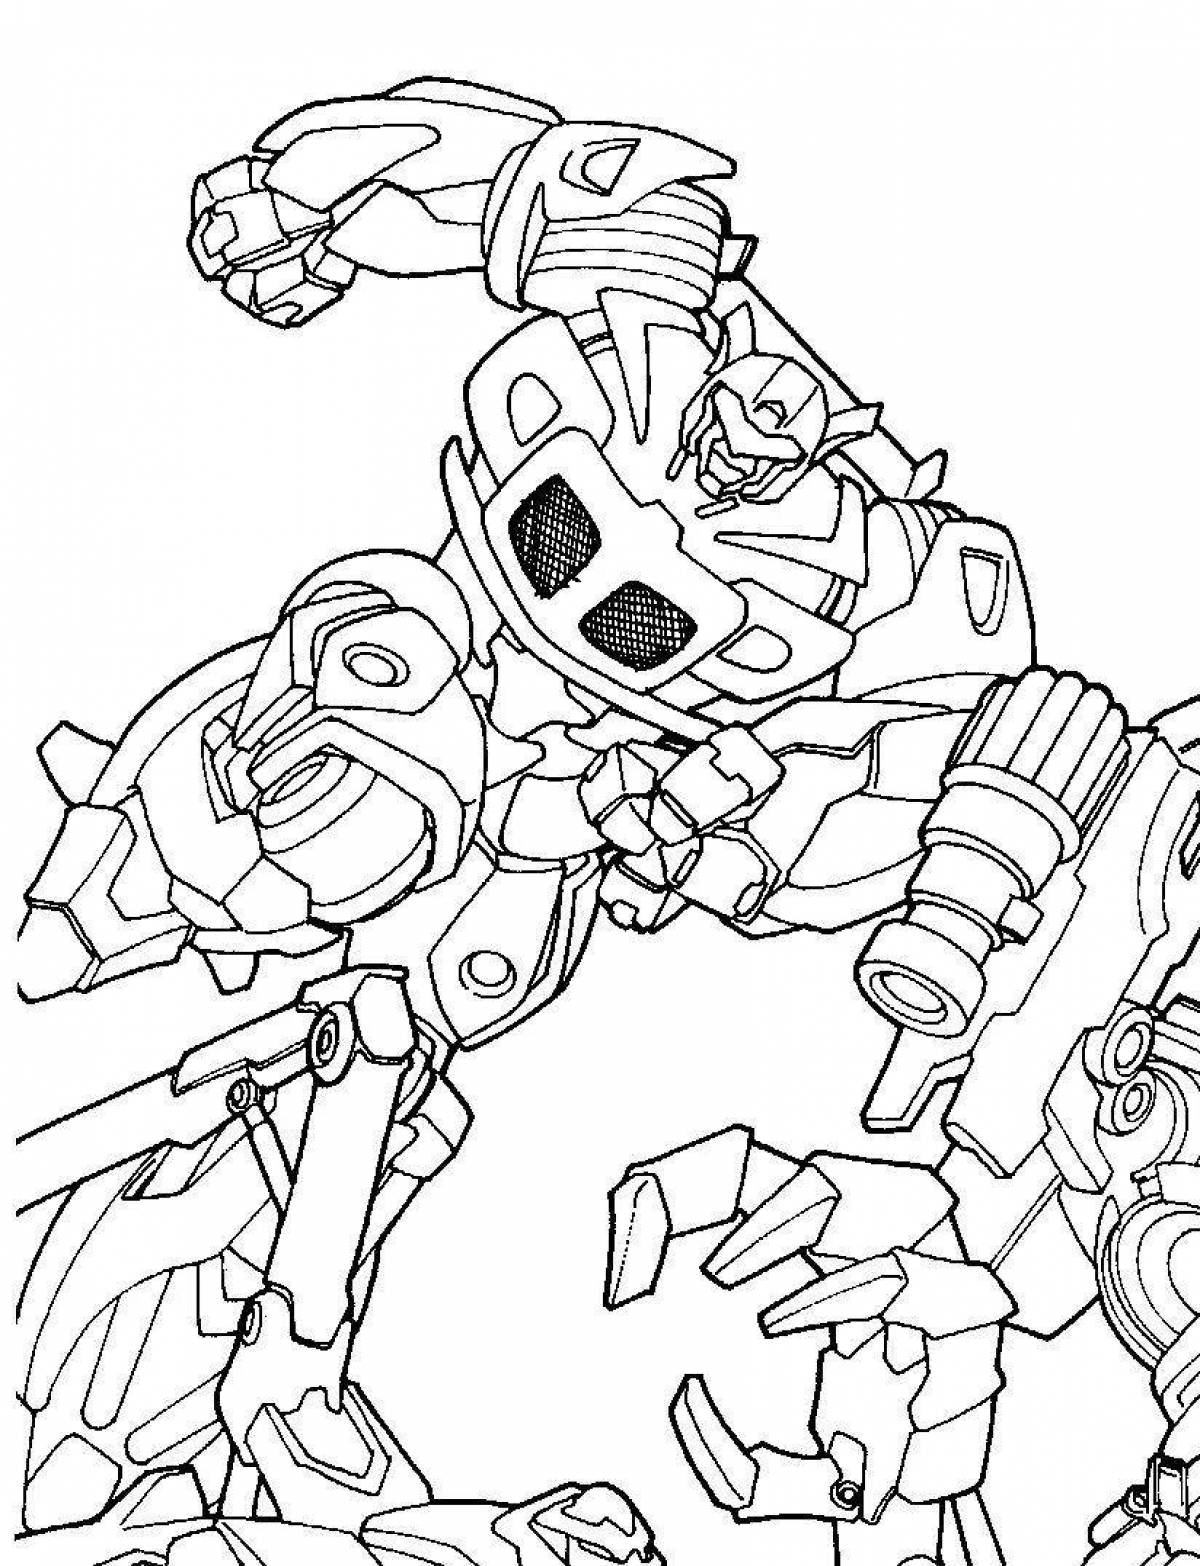 Colorful transformers ratchet coloring page